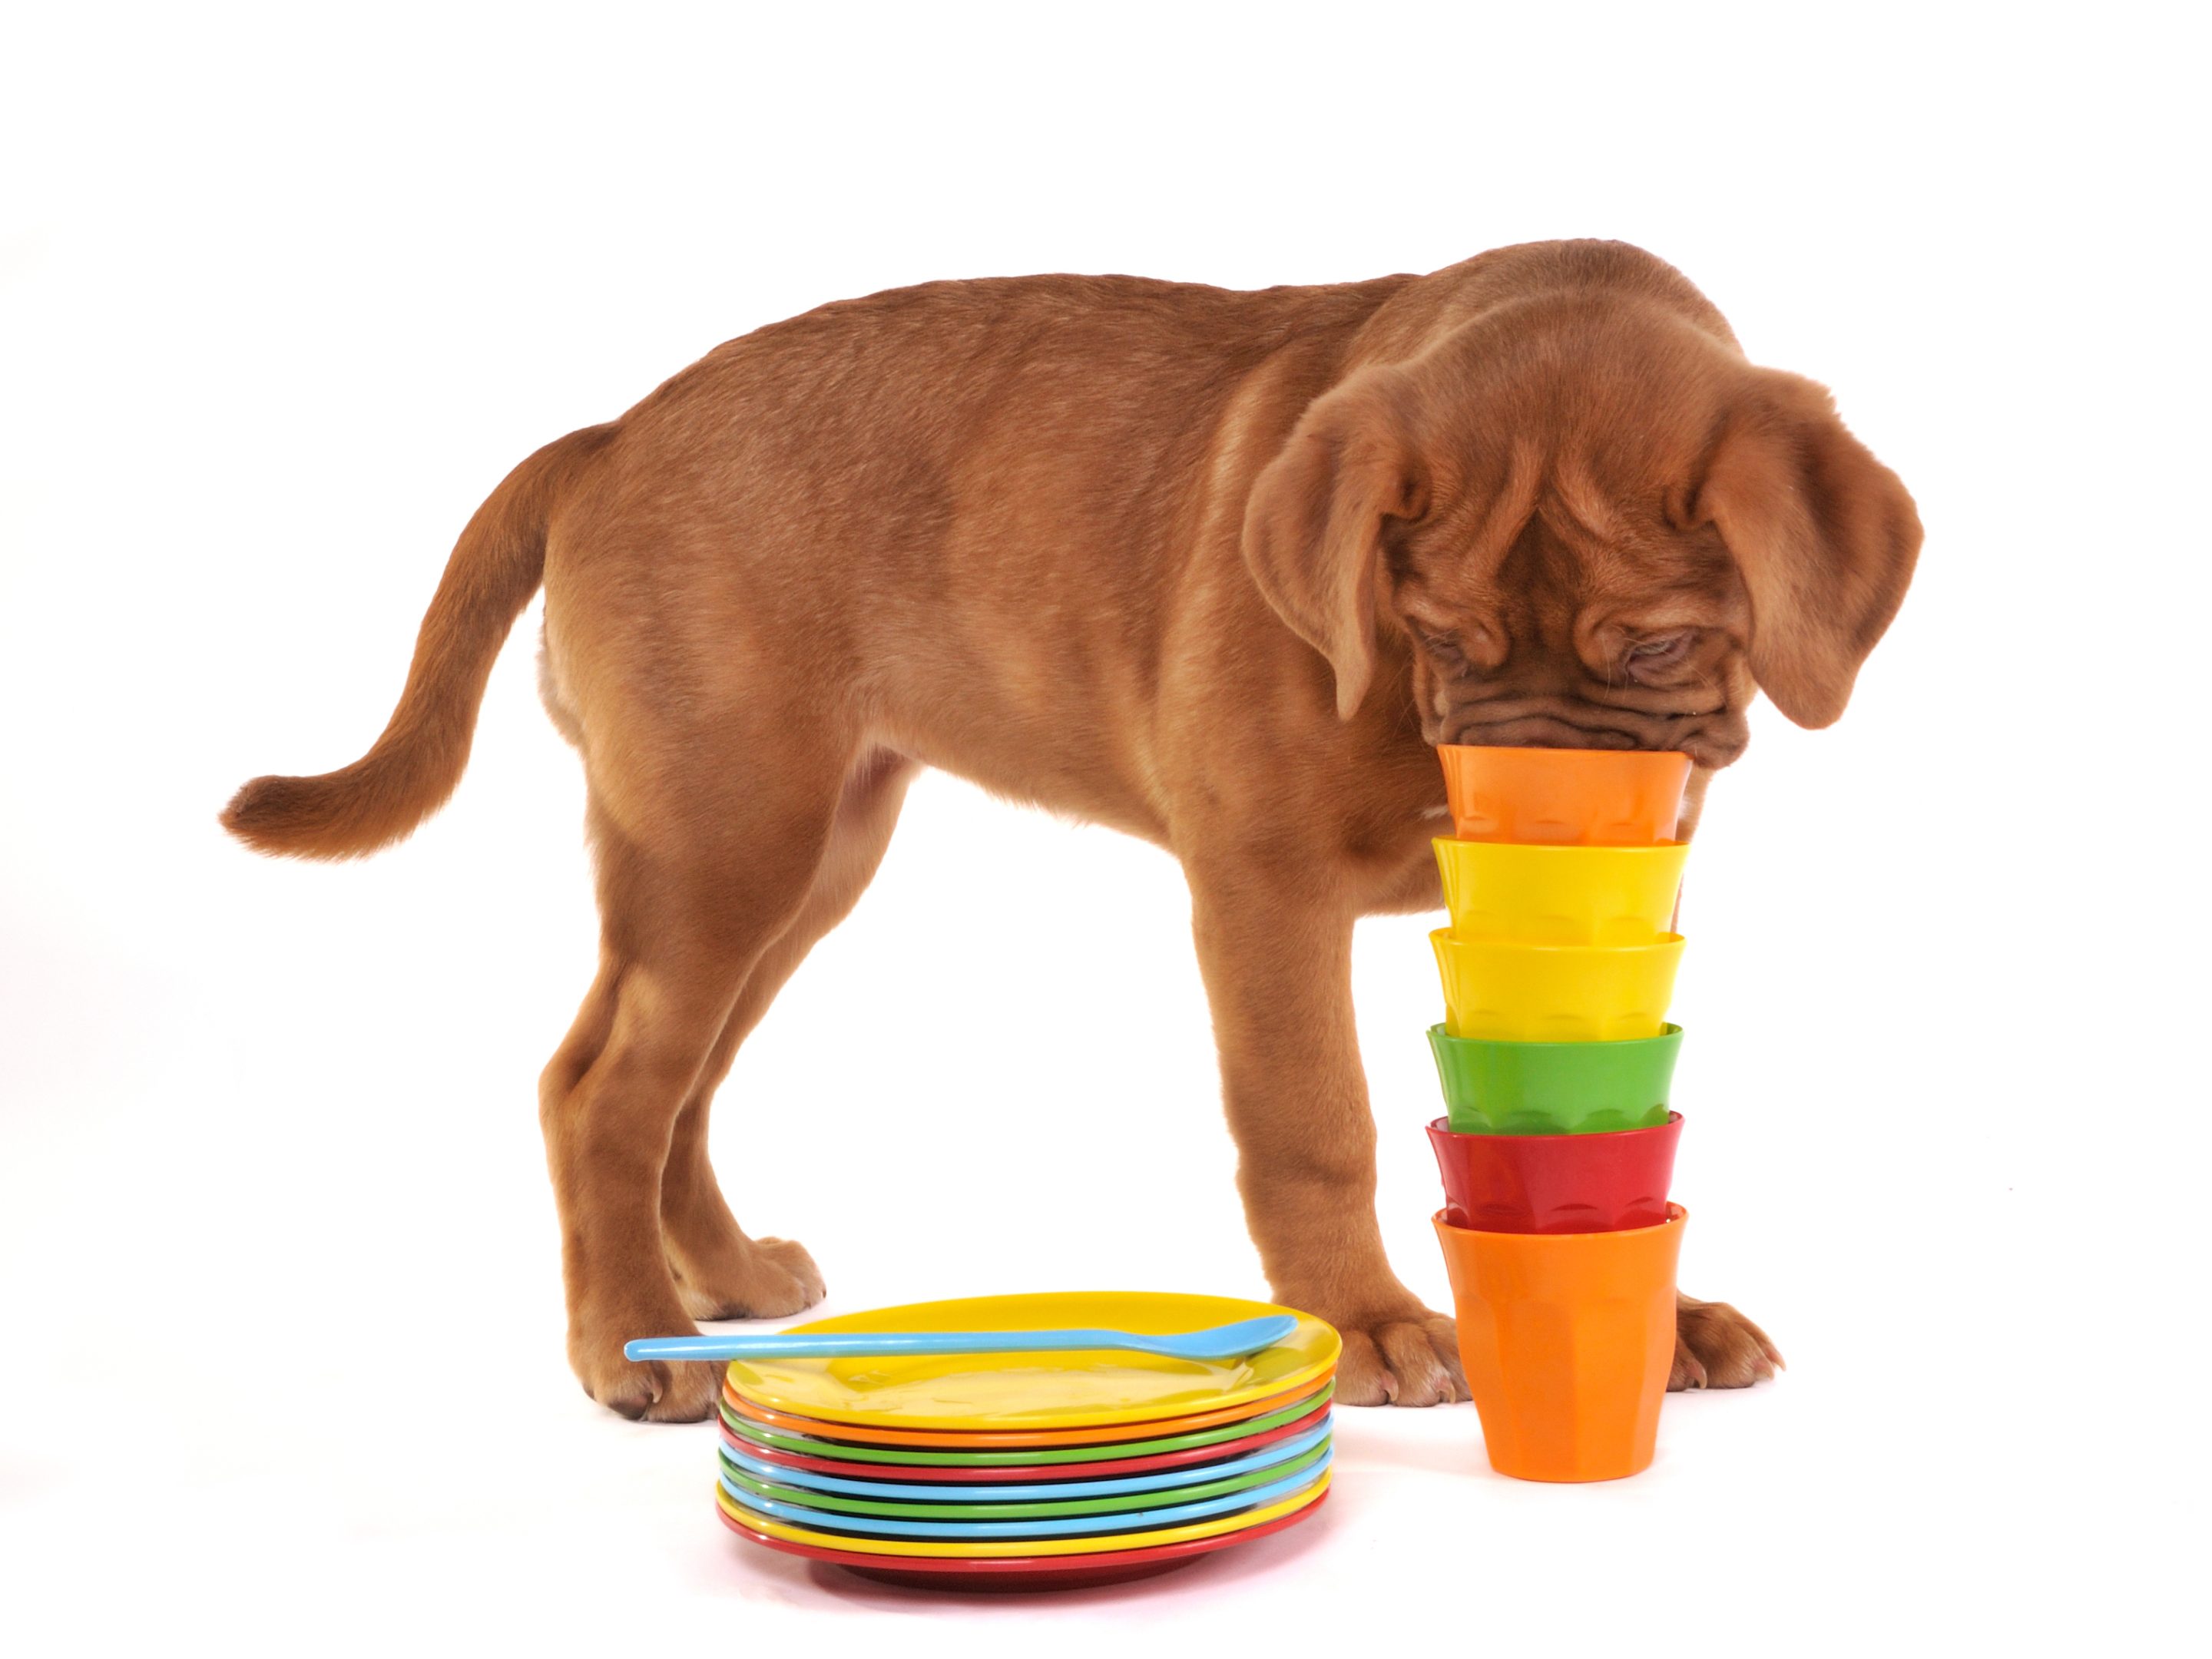 Dog with colorful bowls and cups with his nose inside the cup stack